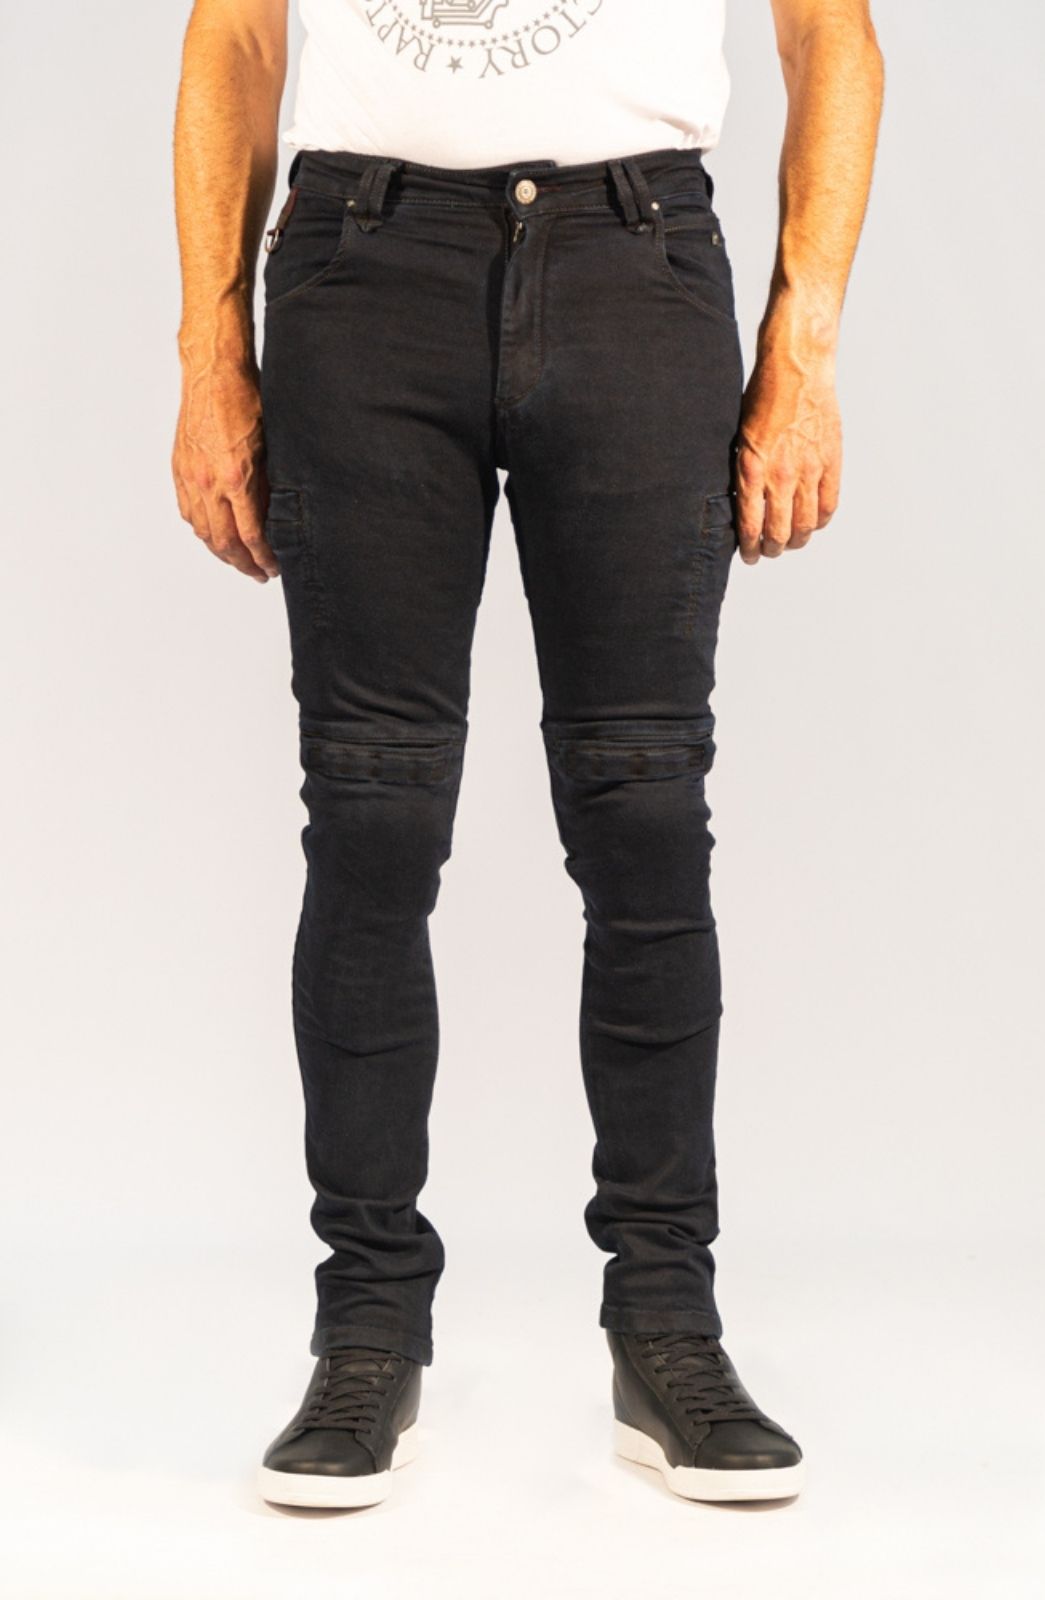 Men's and Women's Motorcycle Jeans | Racered